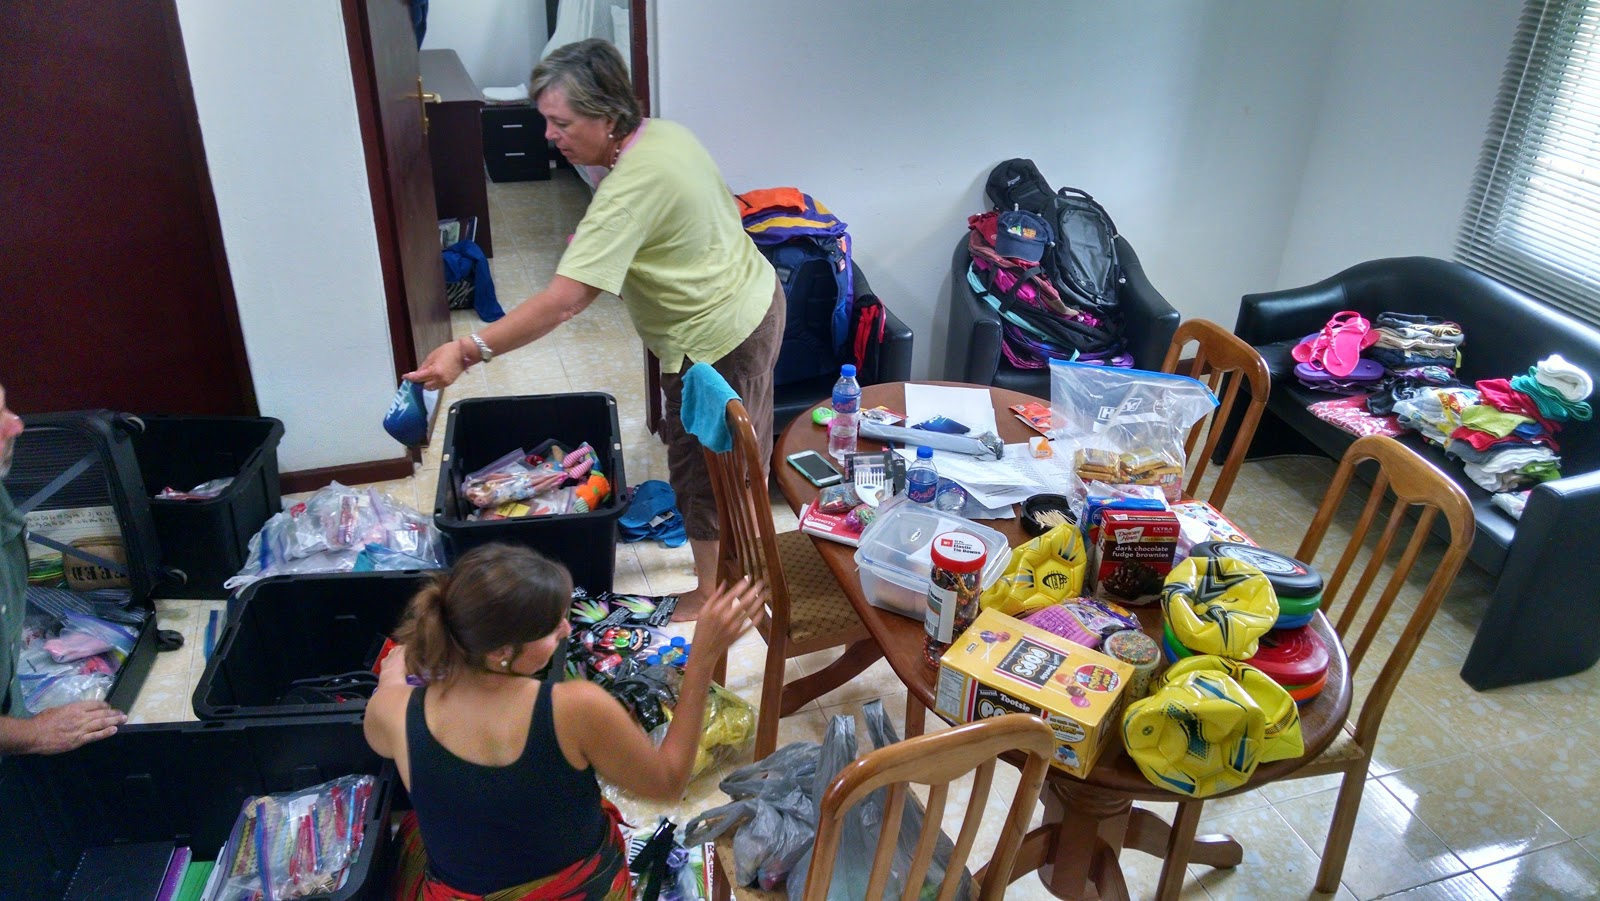 room with toys and other donations laid across tables and couches with open suitcases on the floor and two people organizing the items